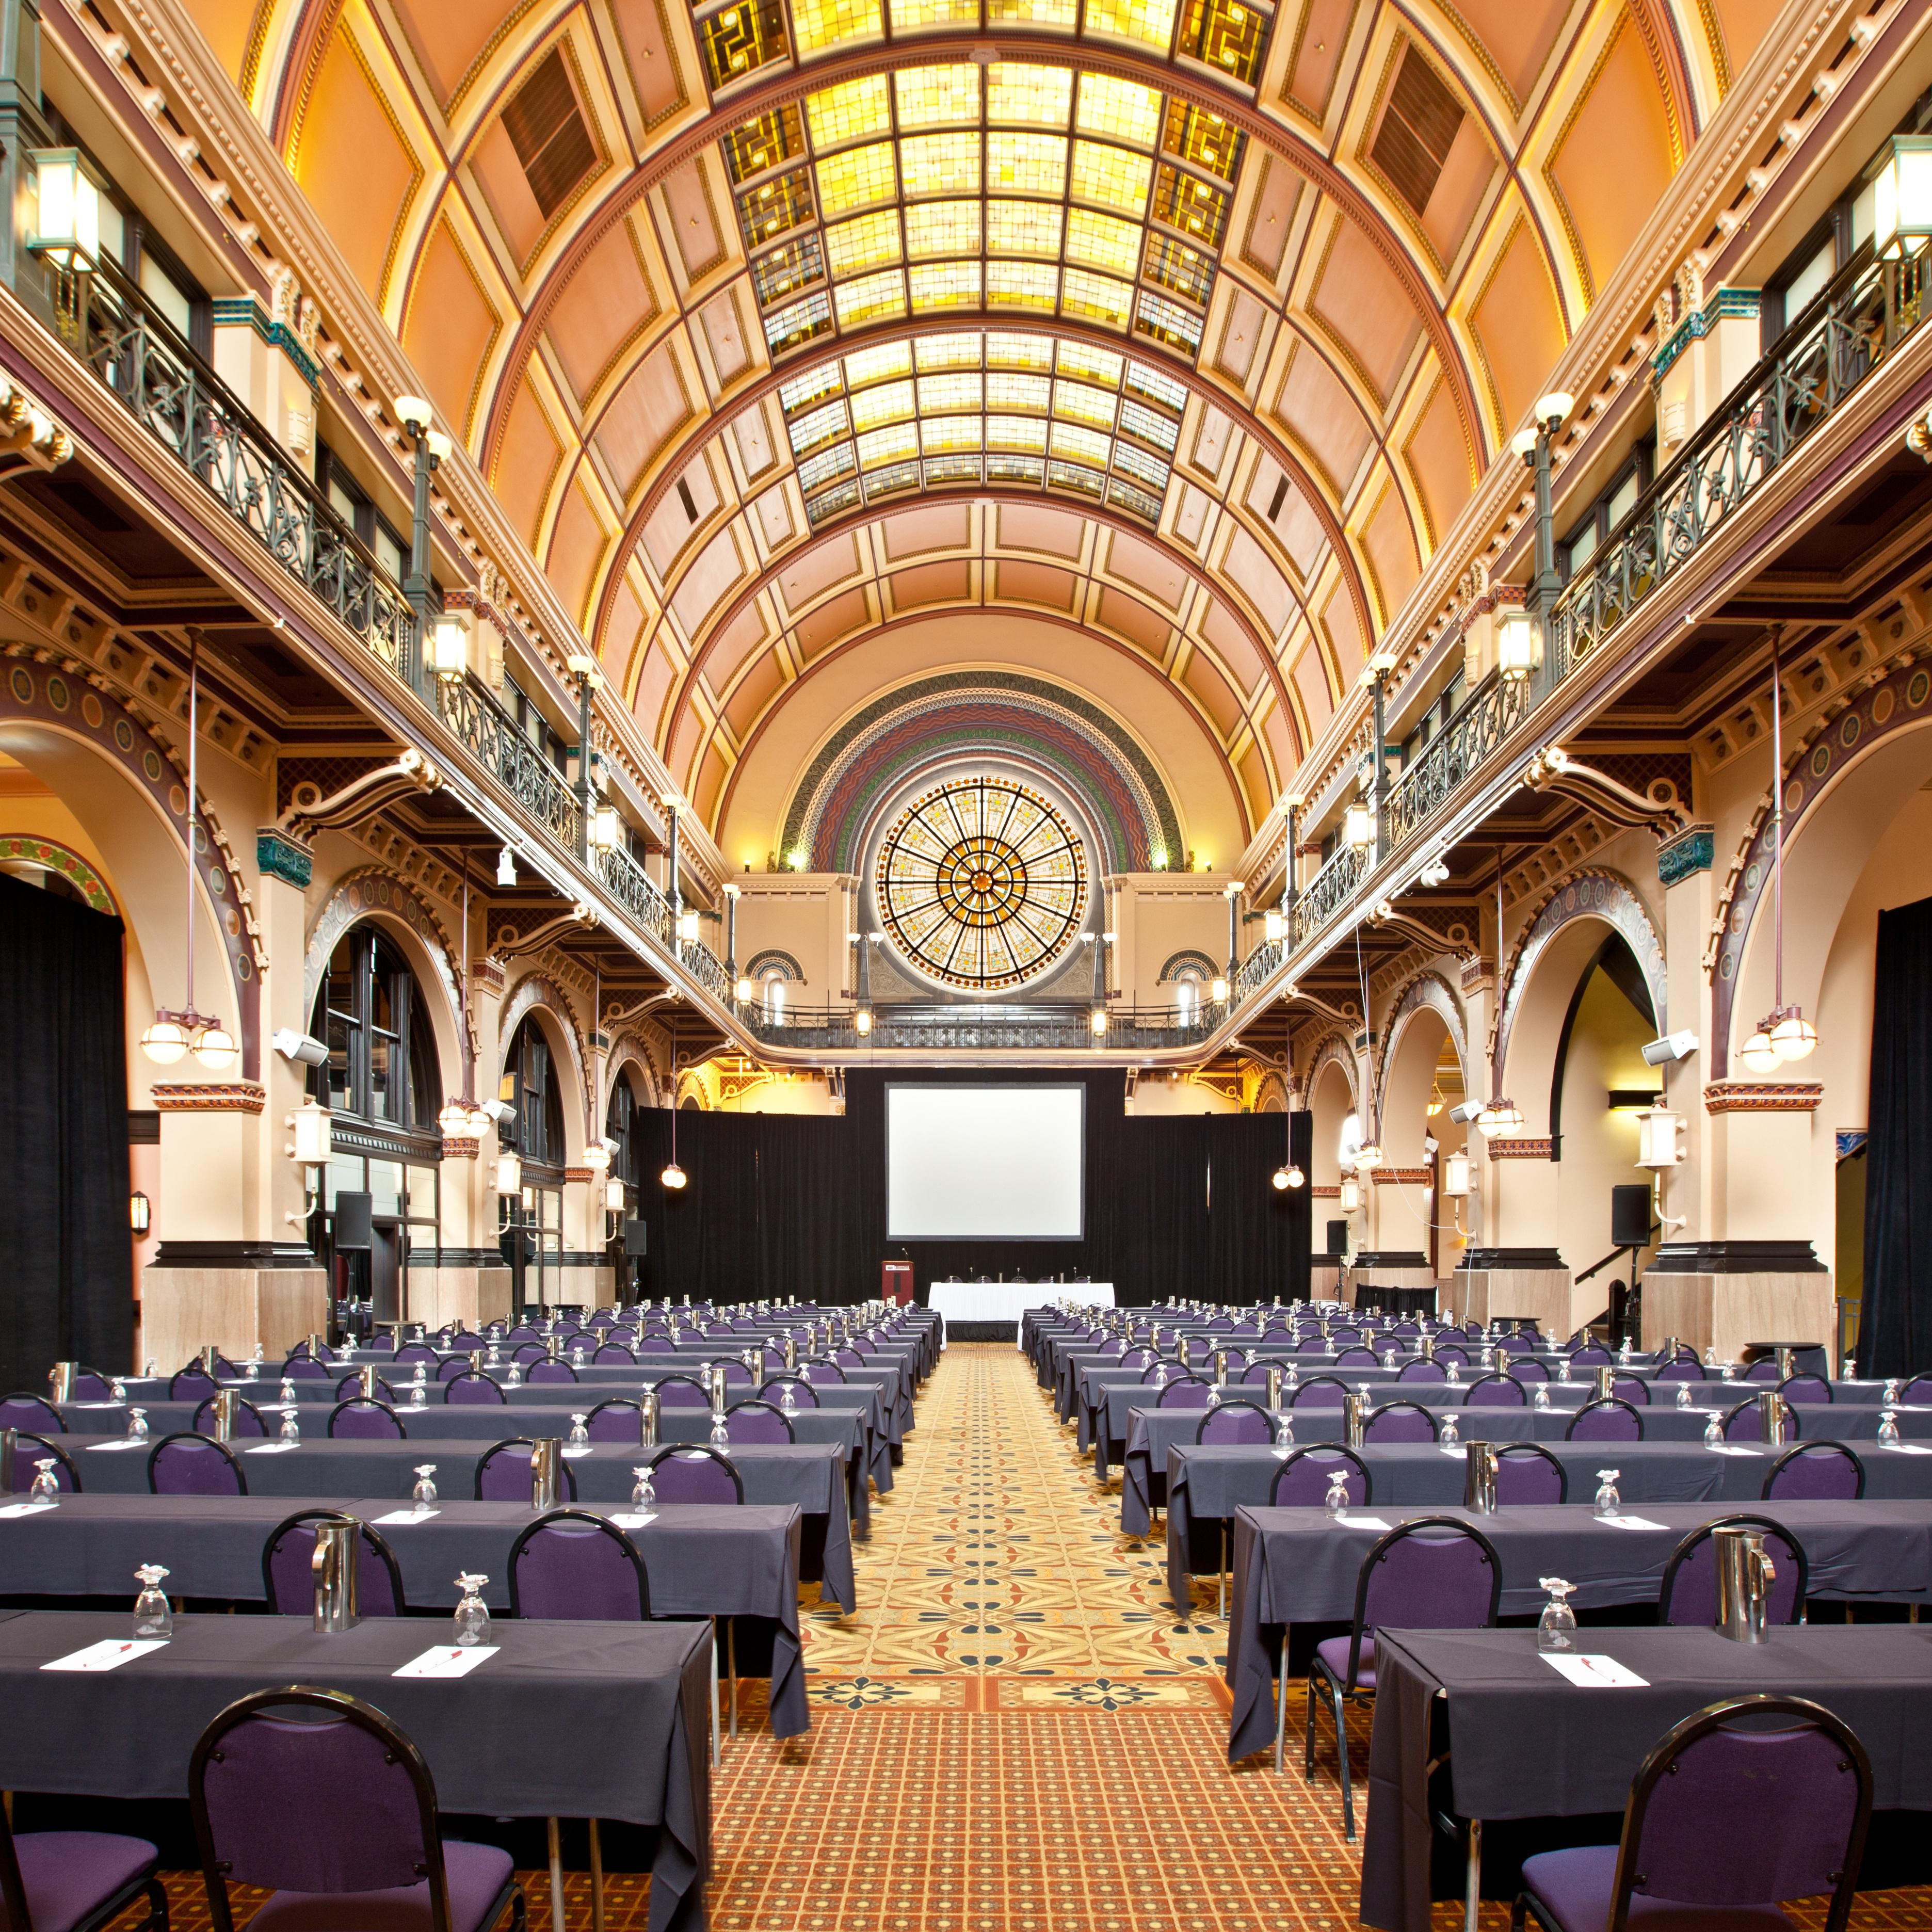 Our Grand Hall Meeting Room is the perfect space for all events